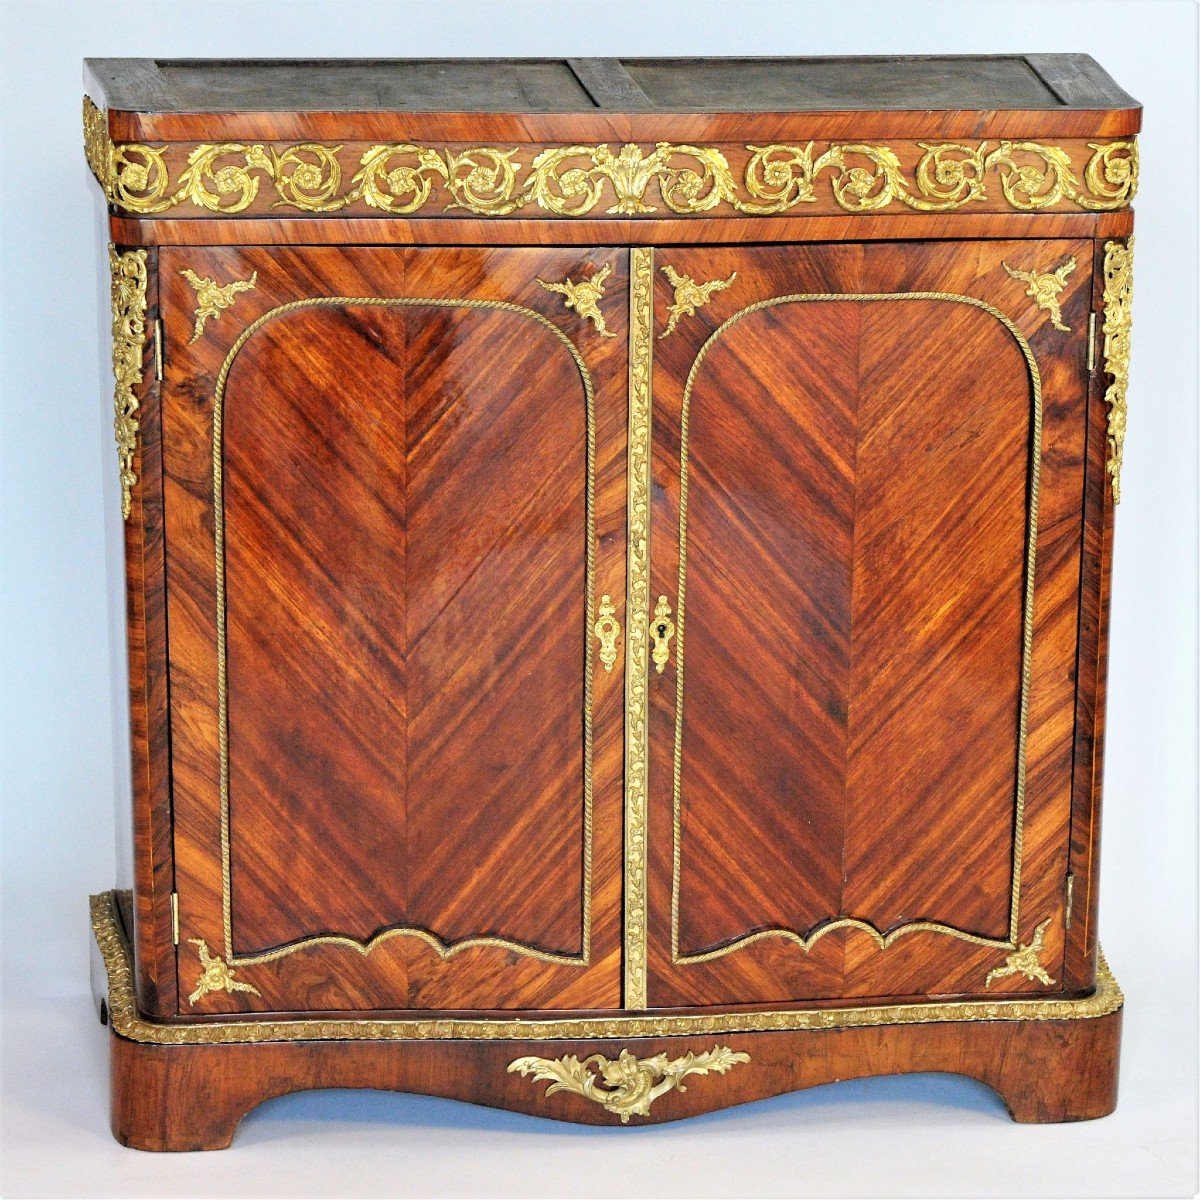   Buffet Cabinet At Support Height In Rosewood And Satin - Napoleon III Period-photo-3